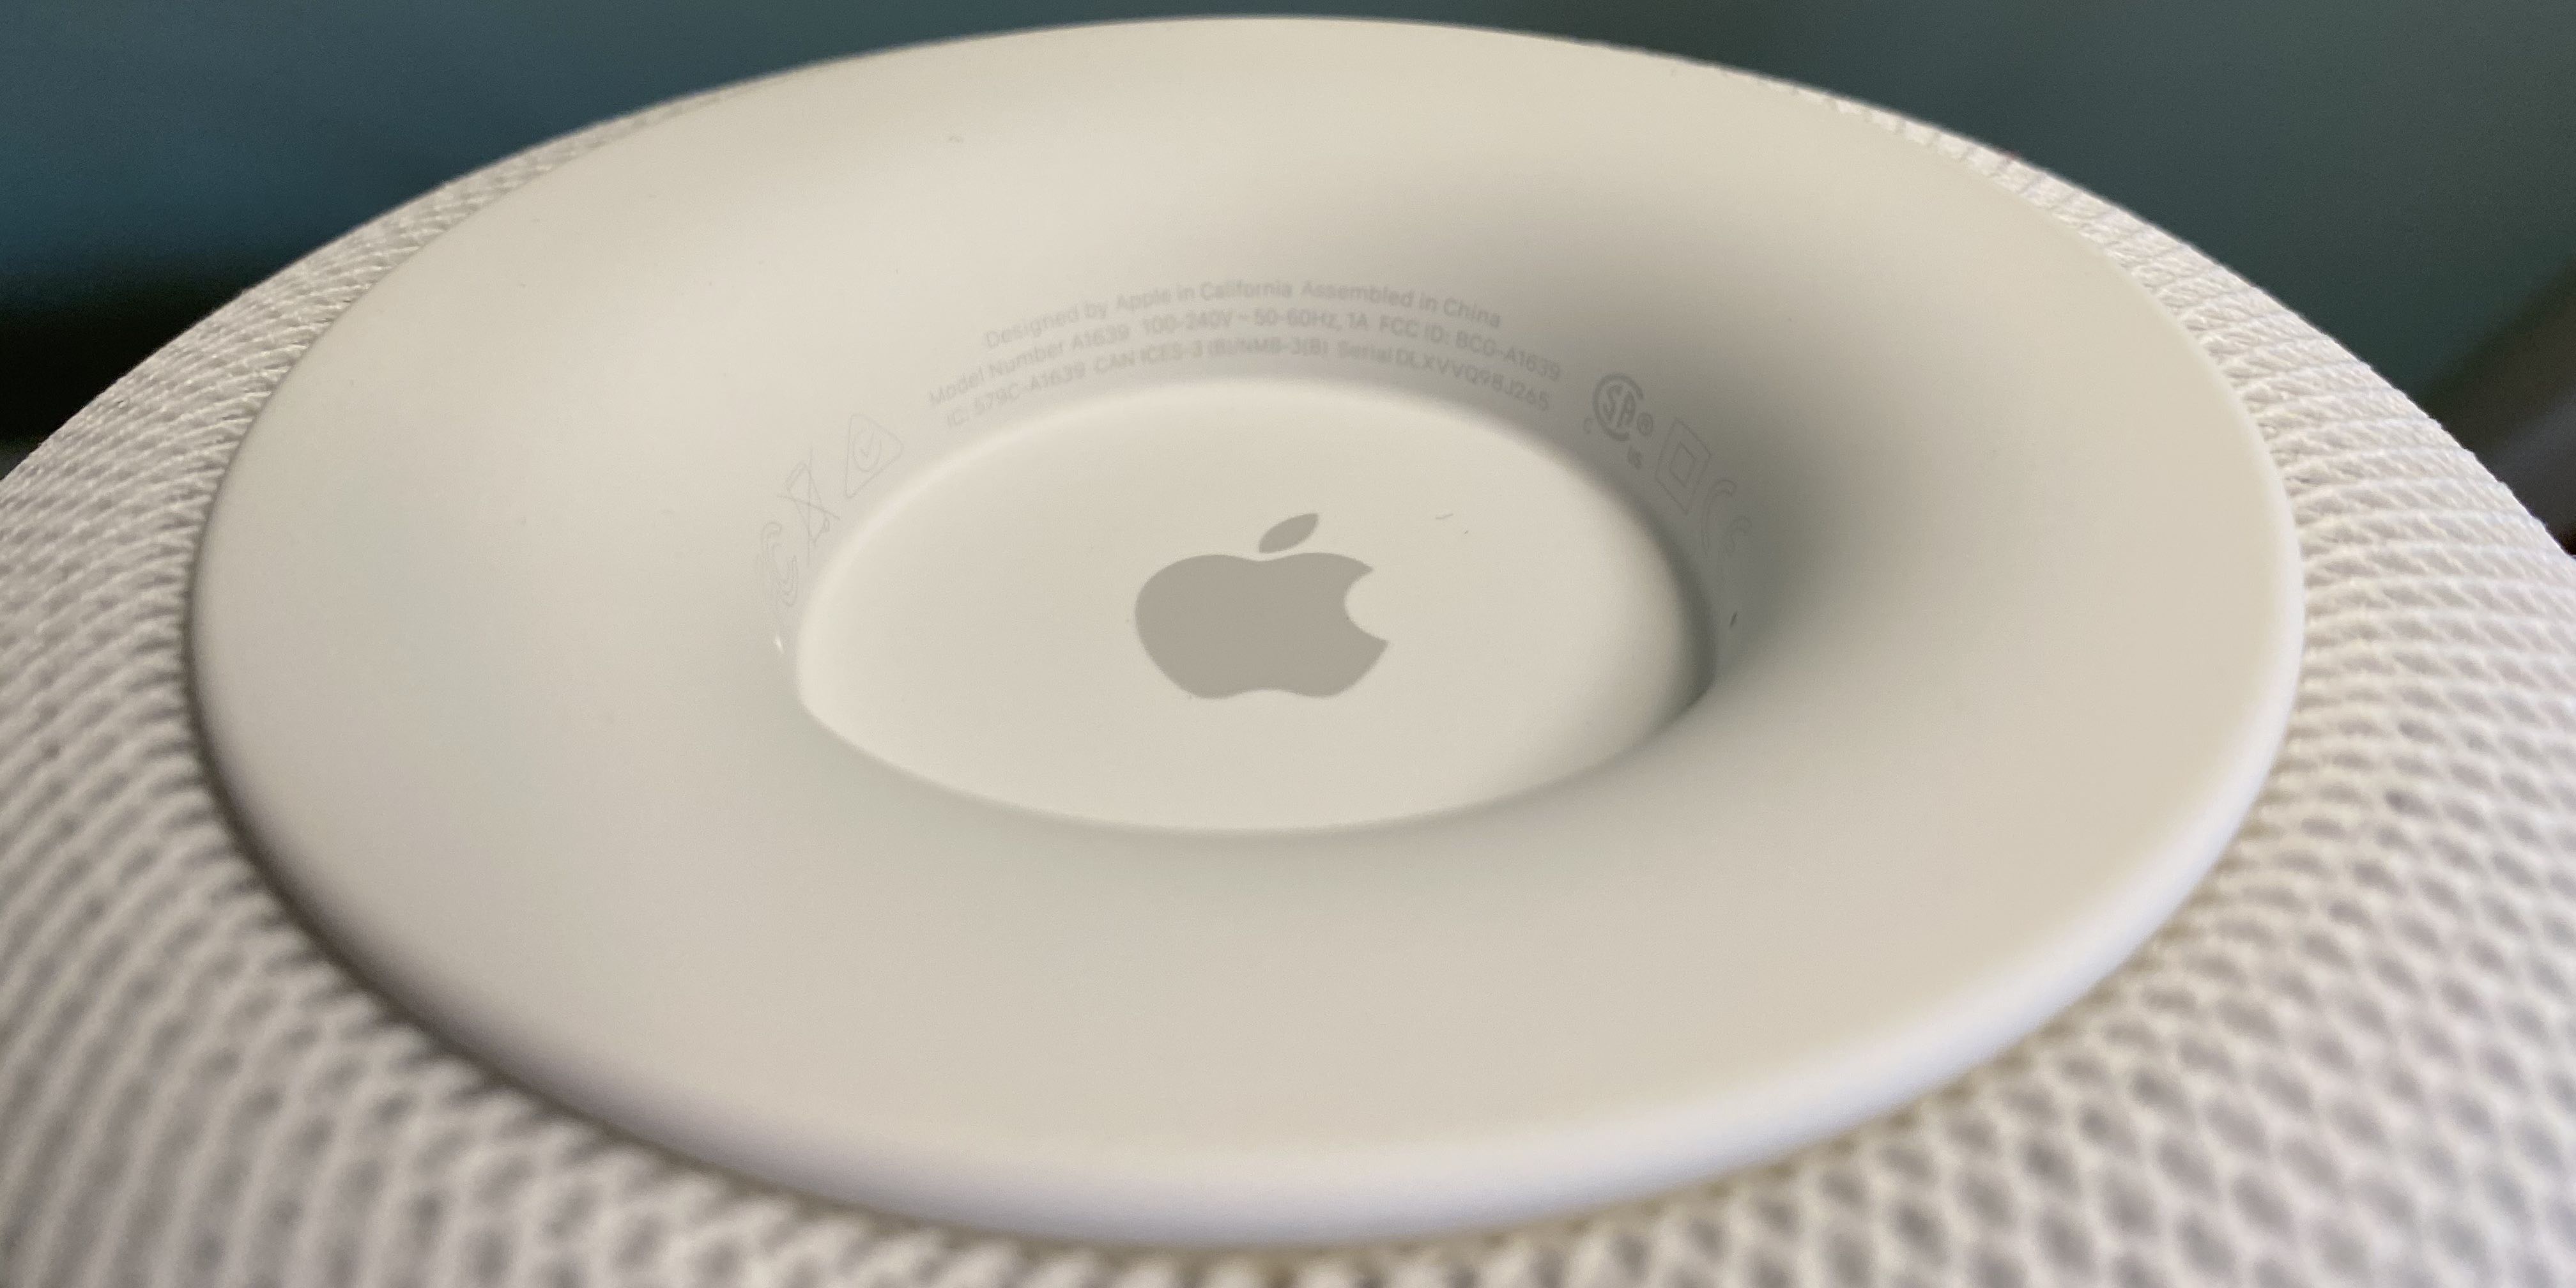 How to find serial number HomePod